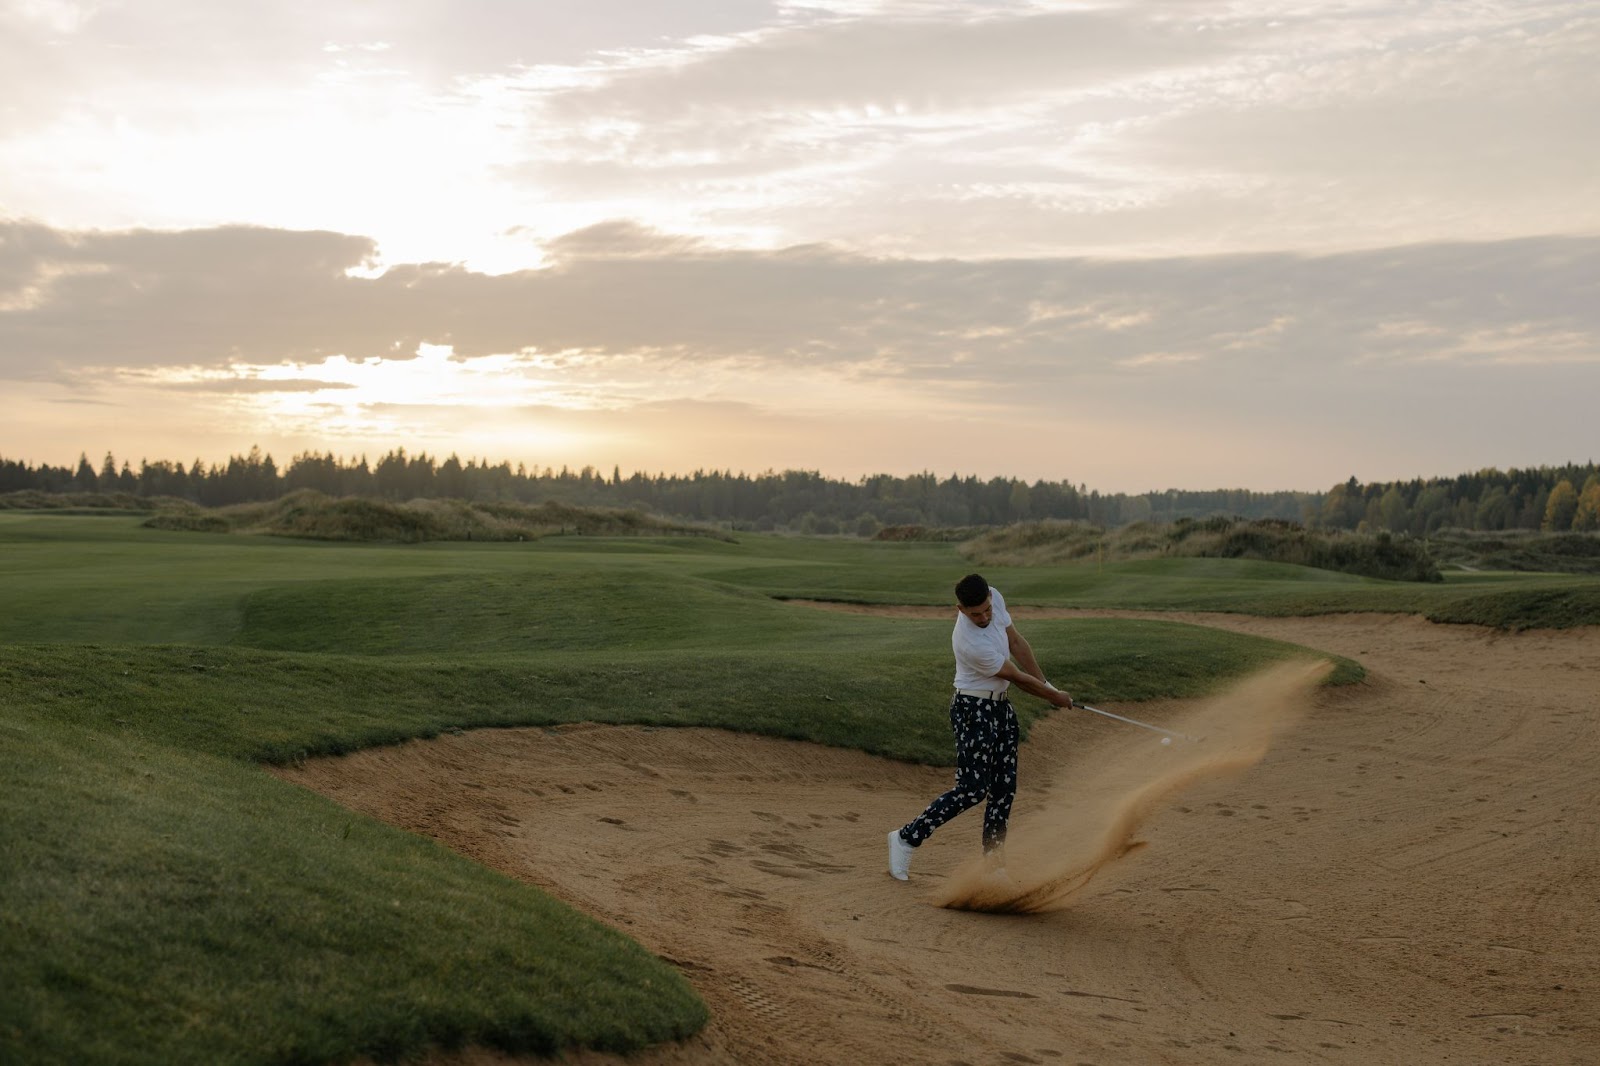 Golf Course Safety: Tips to Reduce Risk of Injury